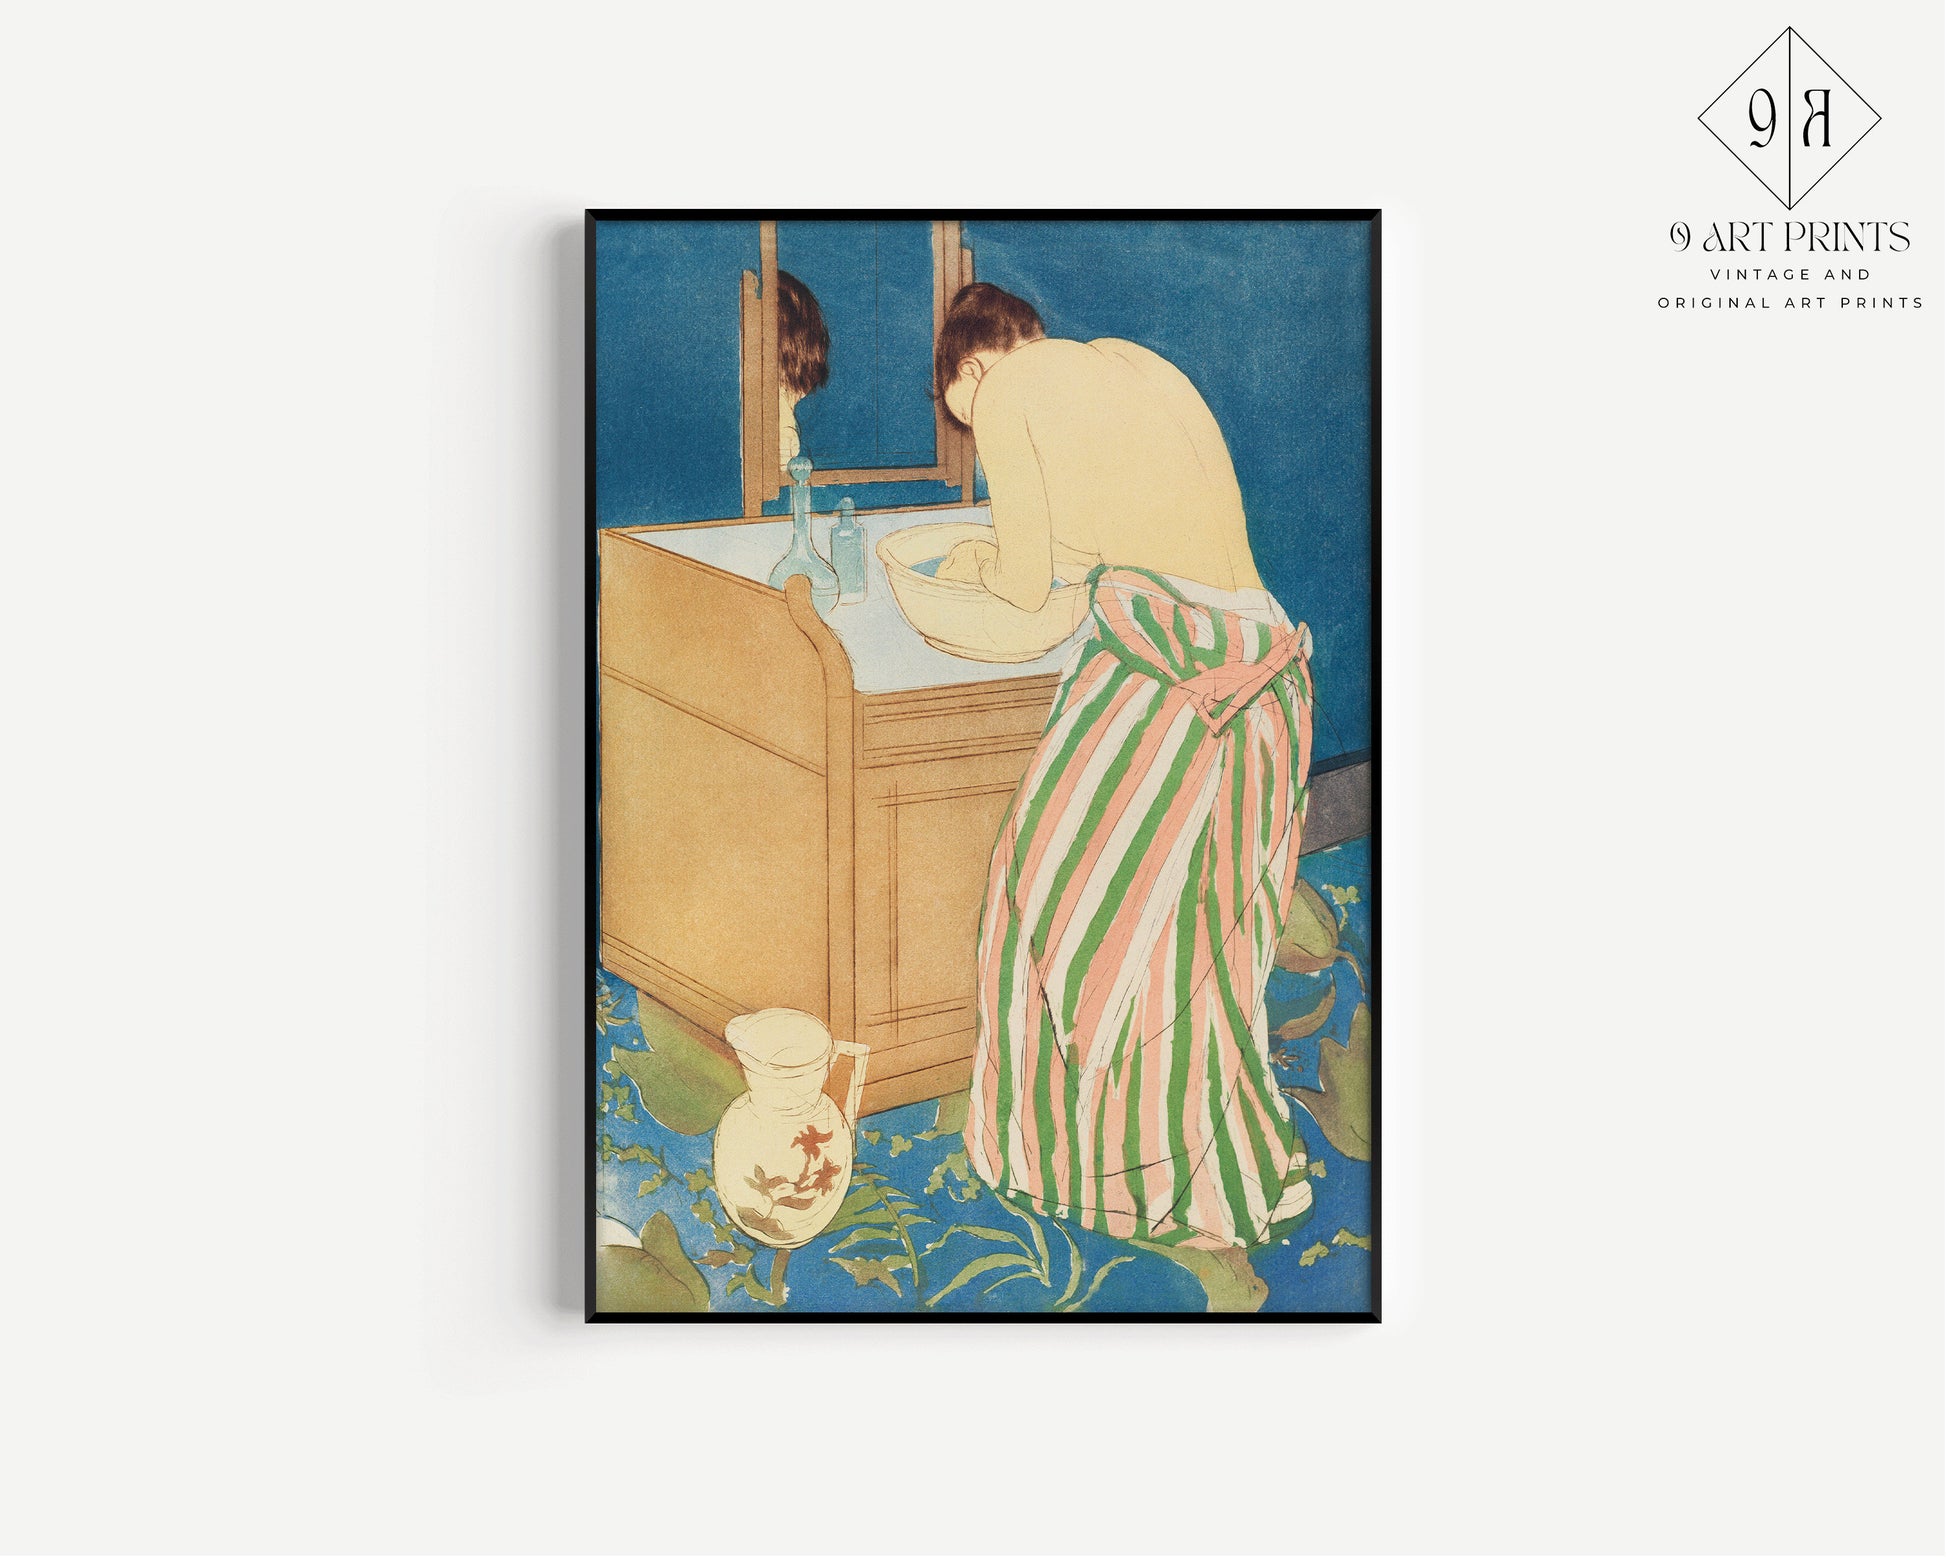 Mary Cassatt Woman Bathing Print Art Museum Fine Poster Impressionist Painting Framed Ready to Hang Exhibition Home Office Decor